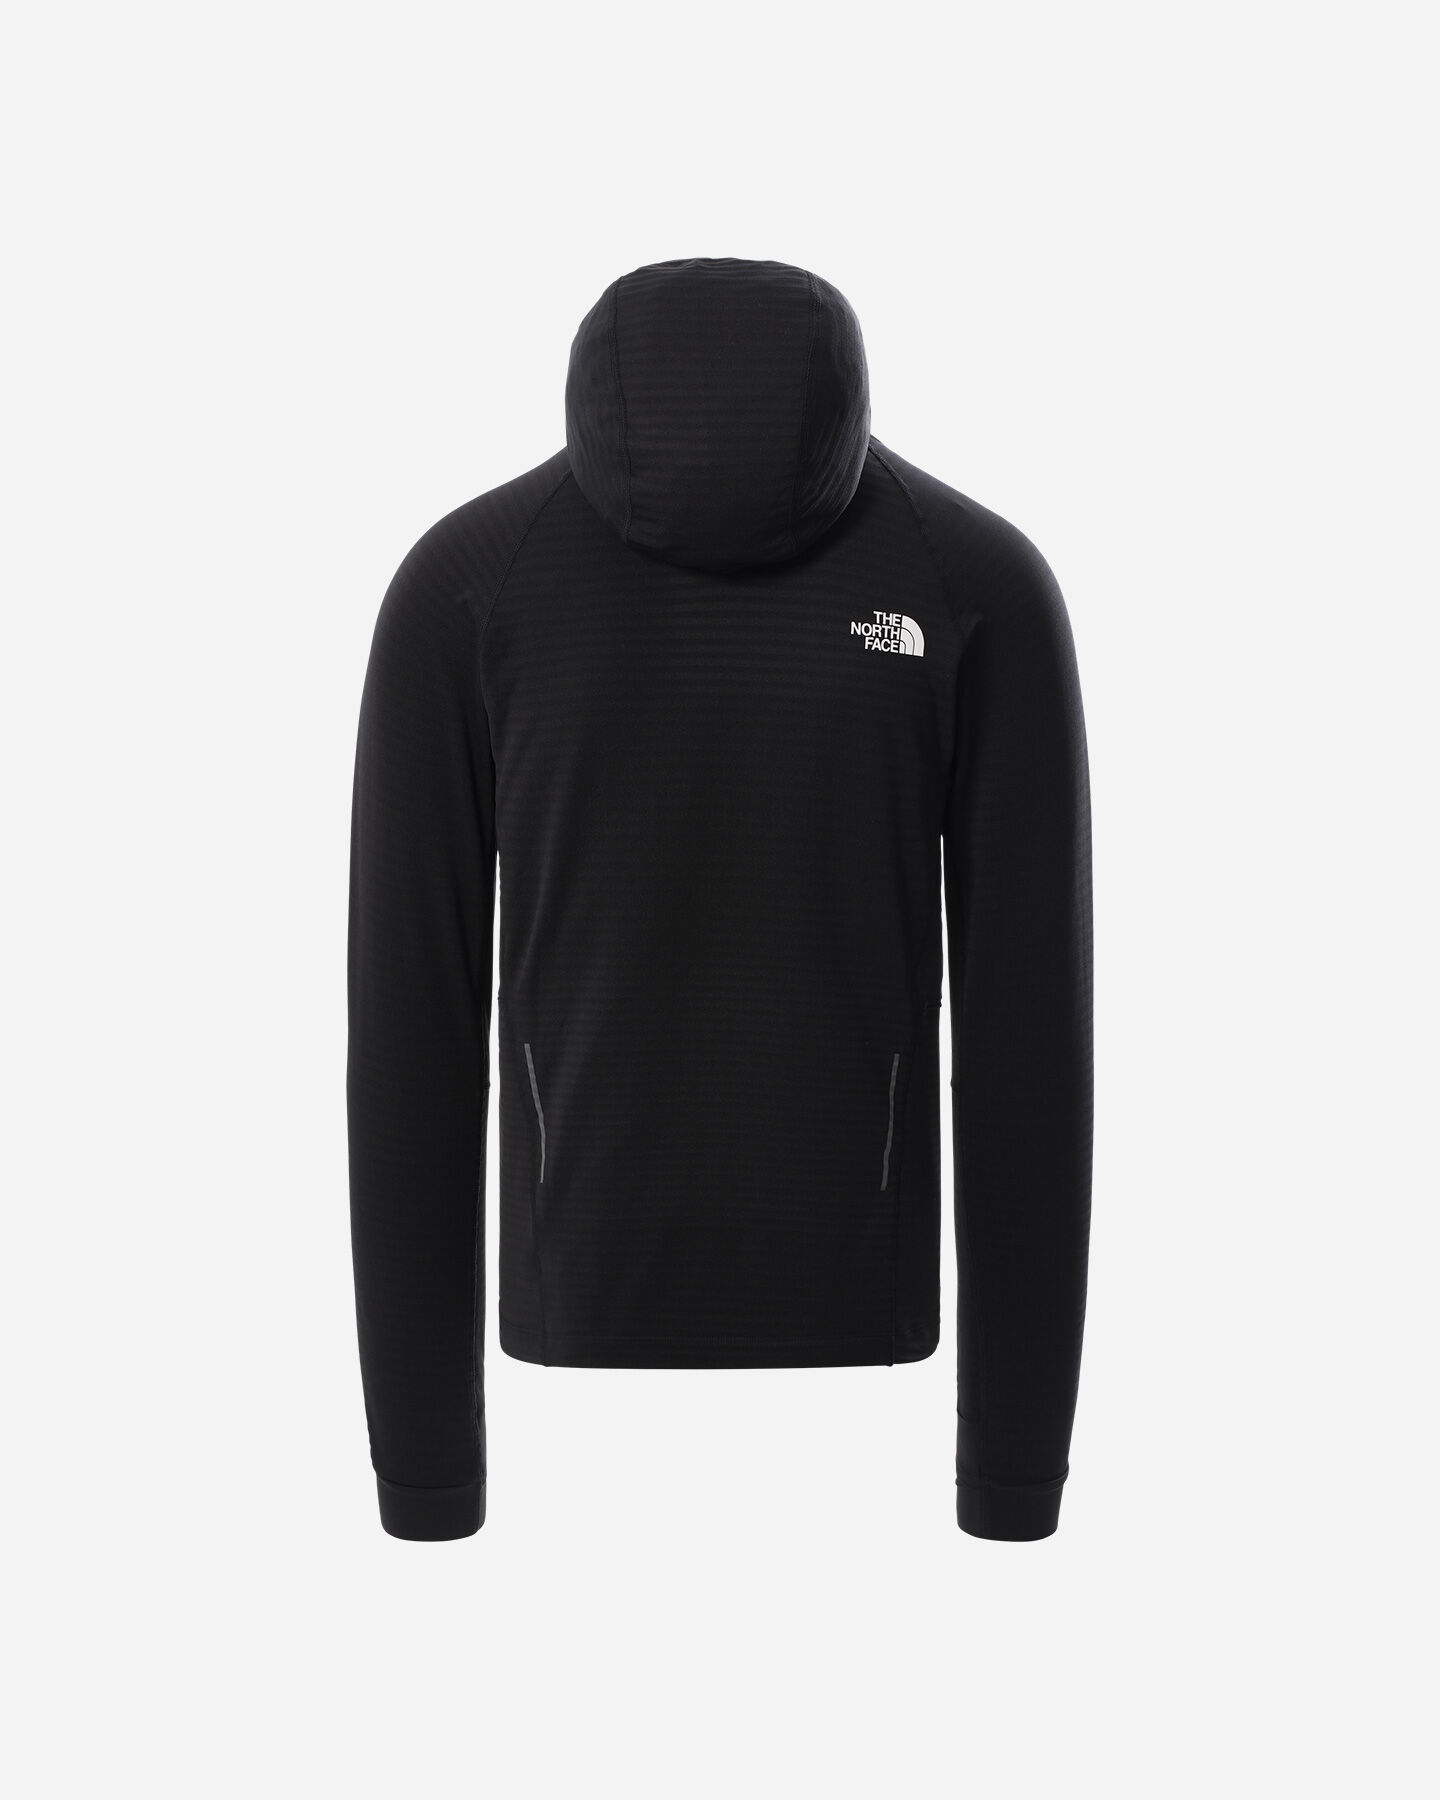  Pile THE NORTH FACE CIRCADIAN HD M S5293209|JK3|S scatto 1